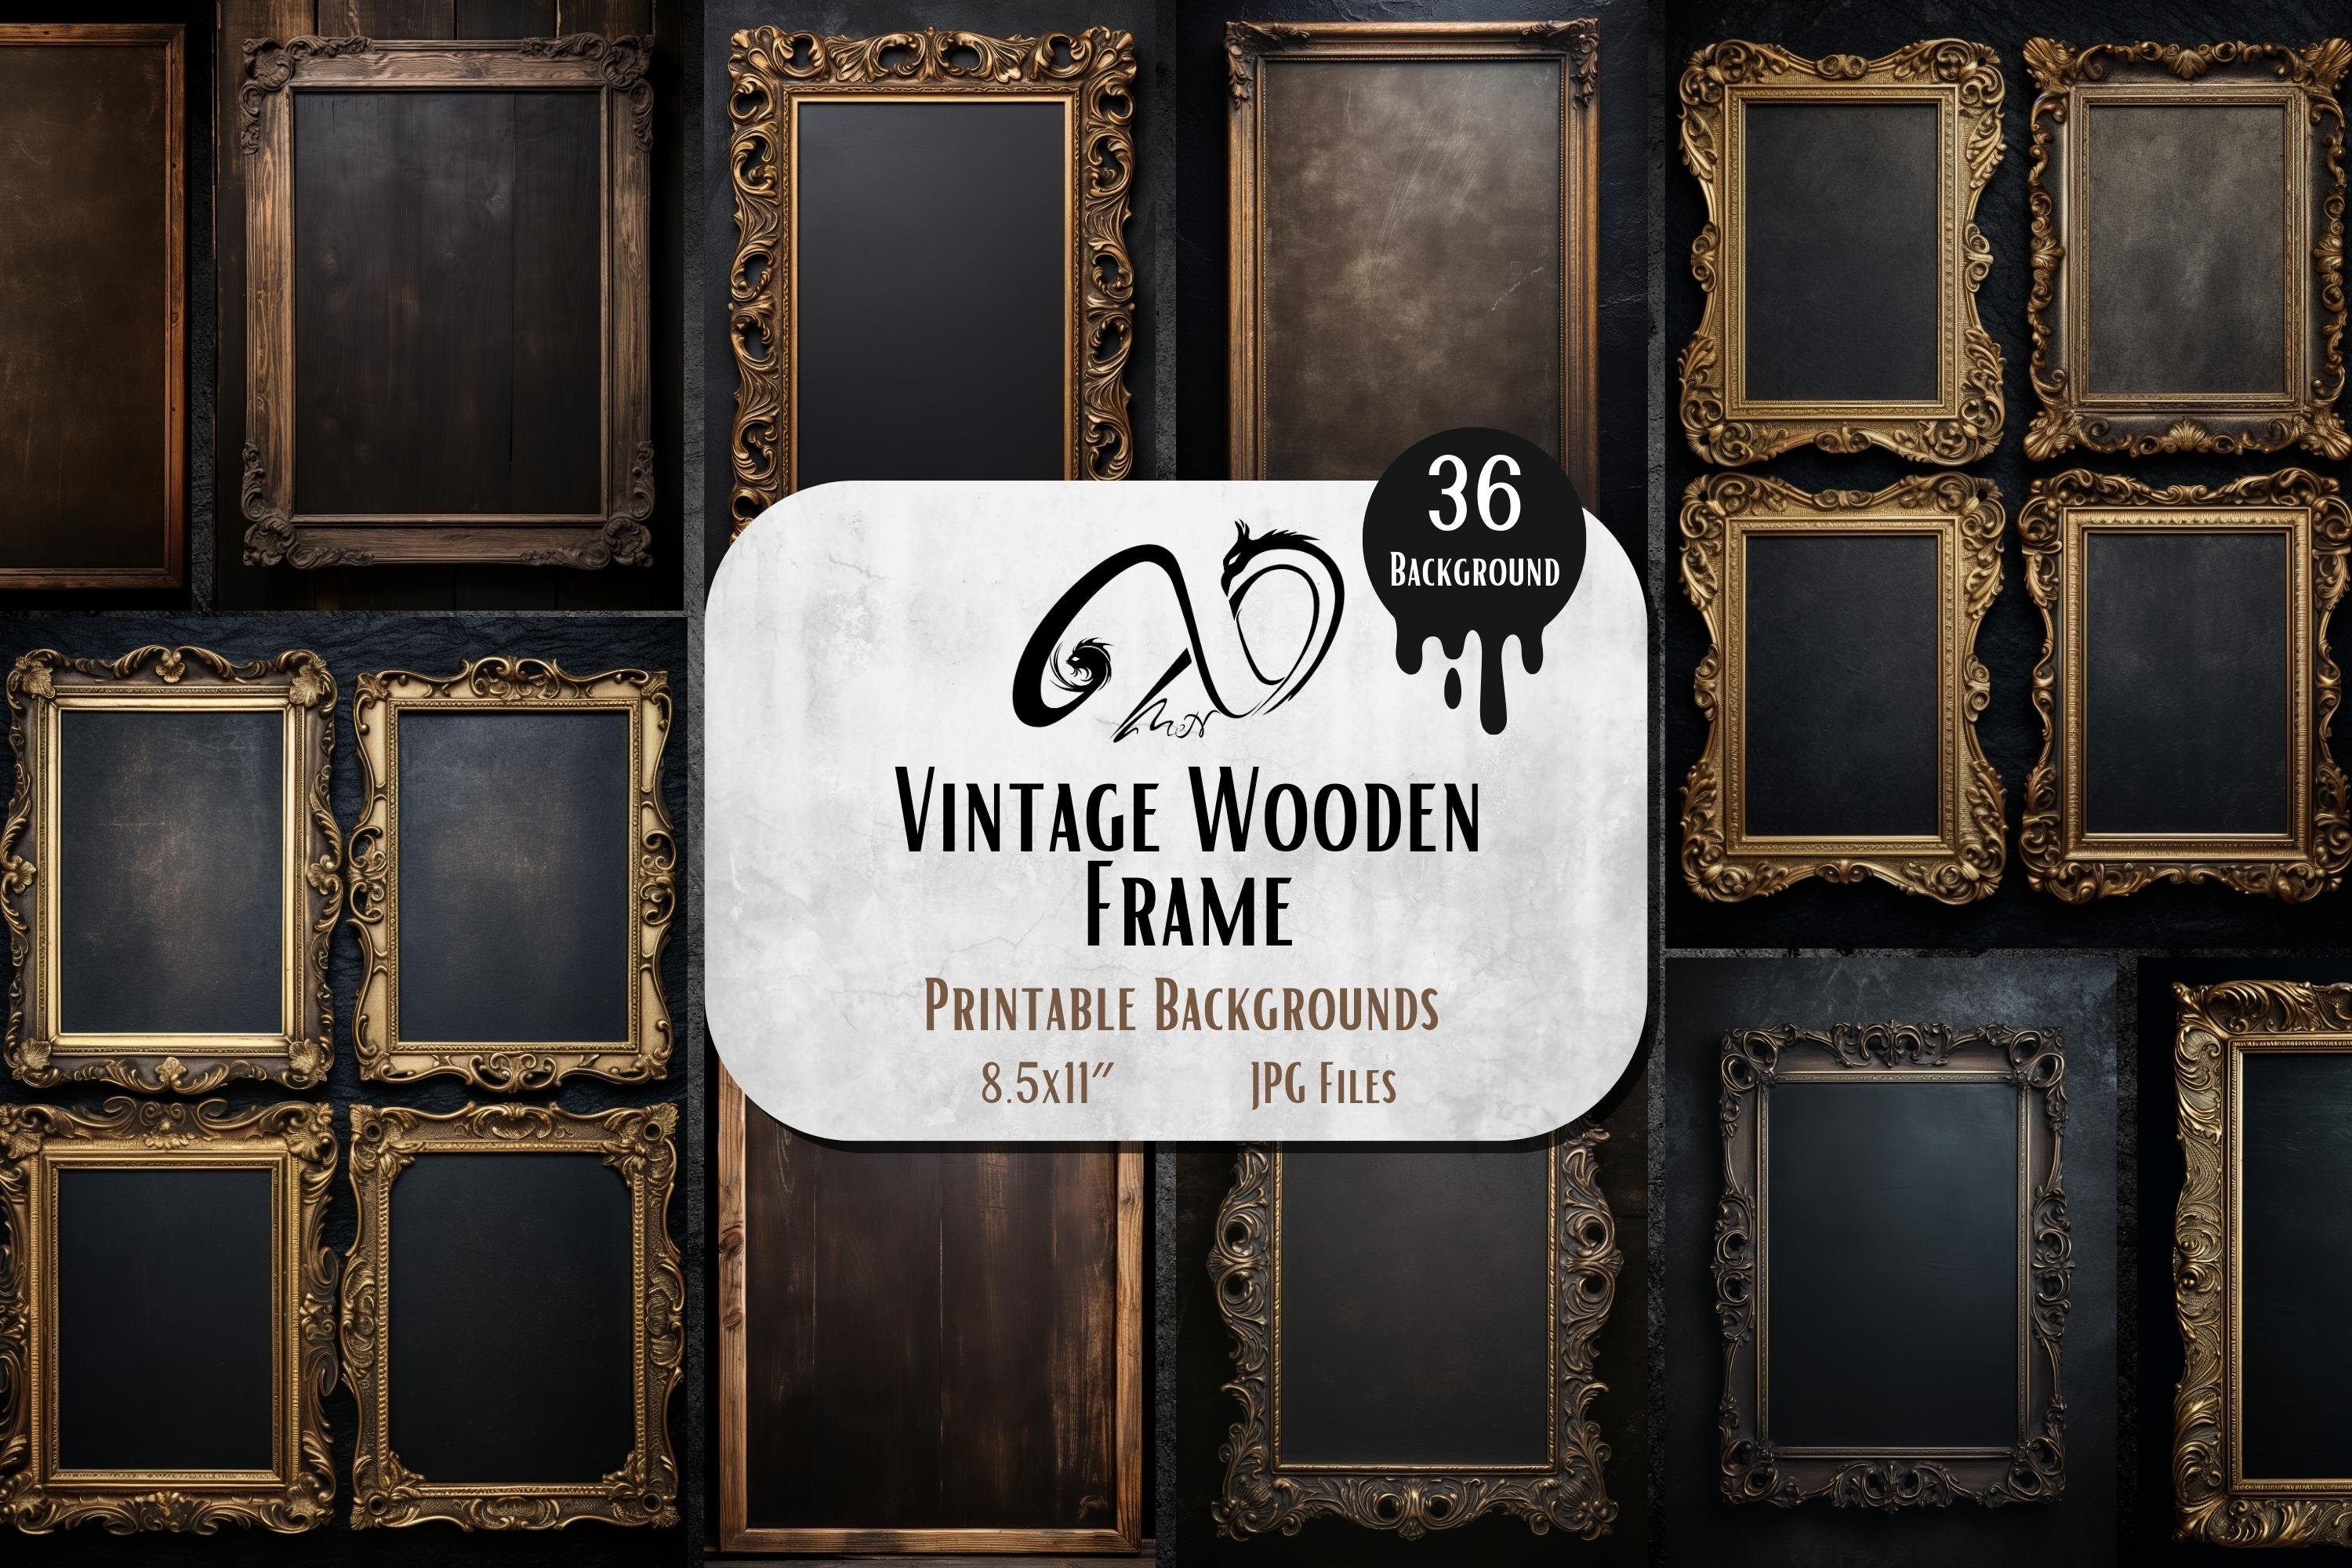 Vintage Picture Frames For Sale that are older than 50 years